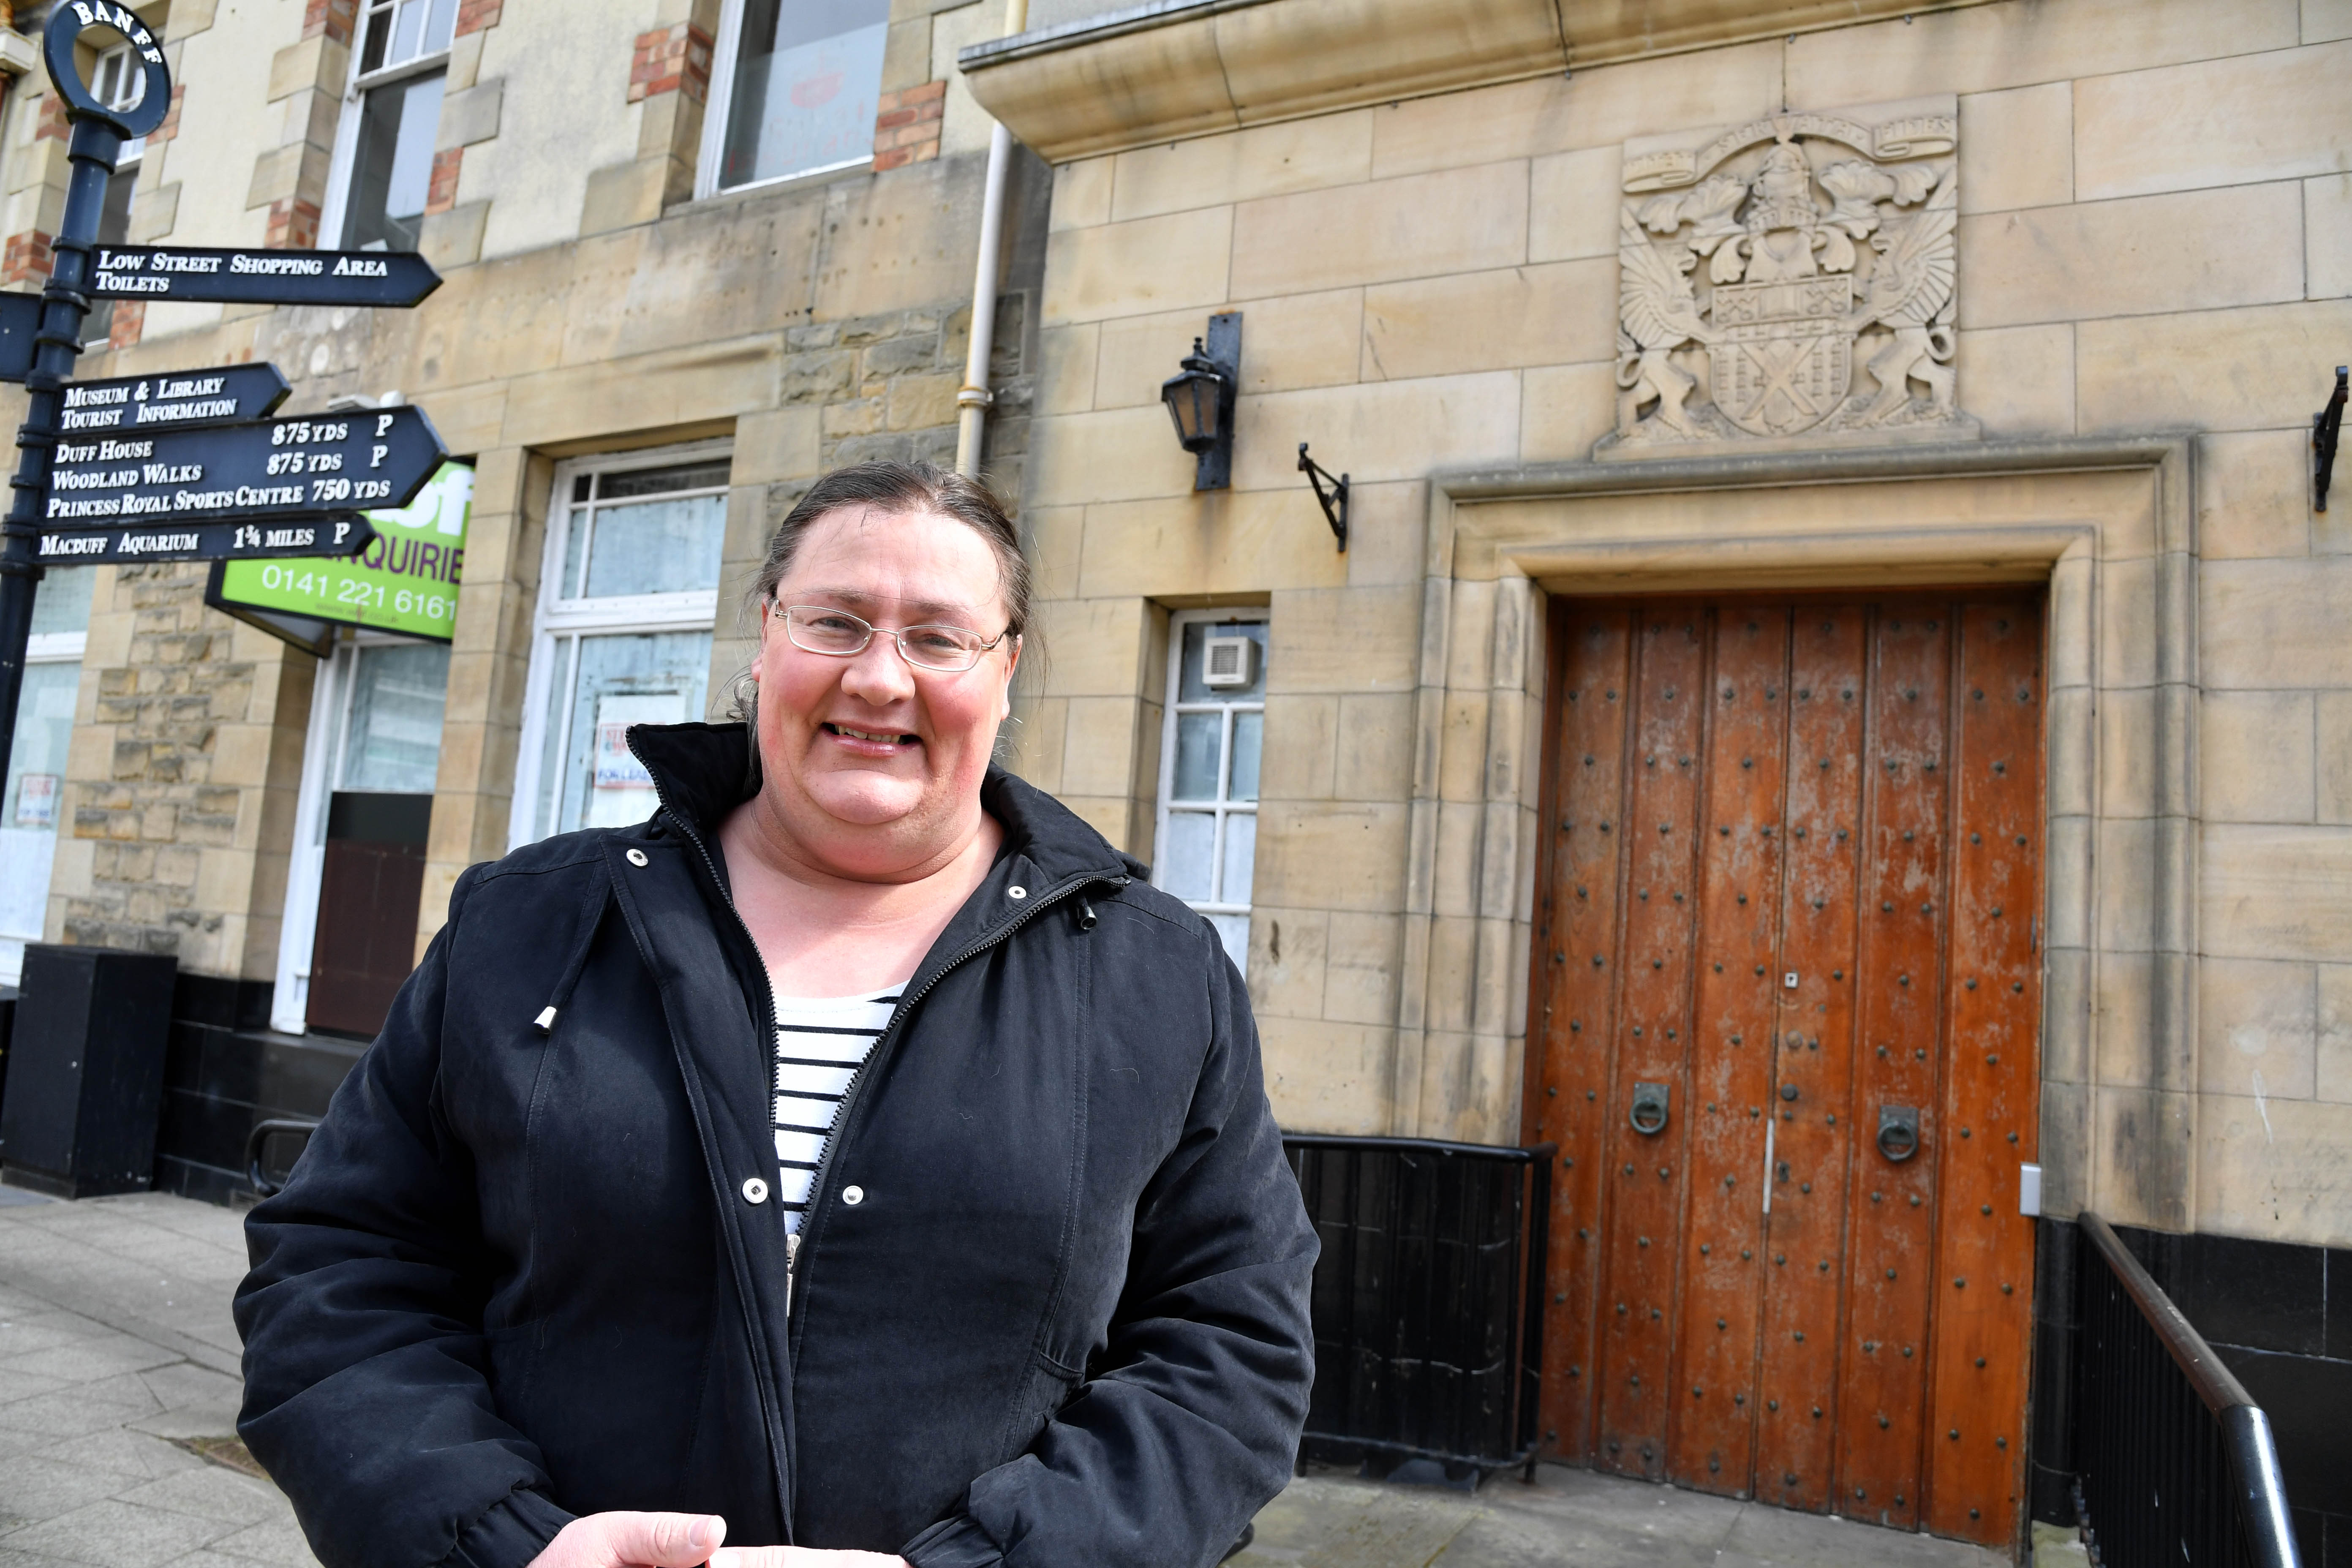 Co-founder of the new tourist centre Michelle Cameron is pleased the building lease has been agreed meaning the old RBS building will have a new purpose